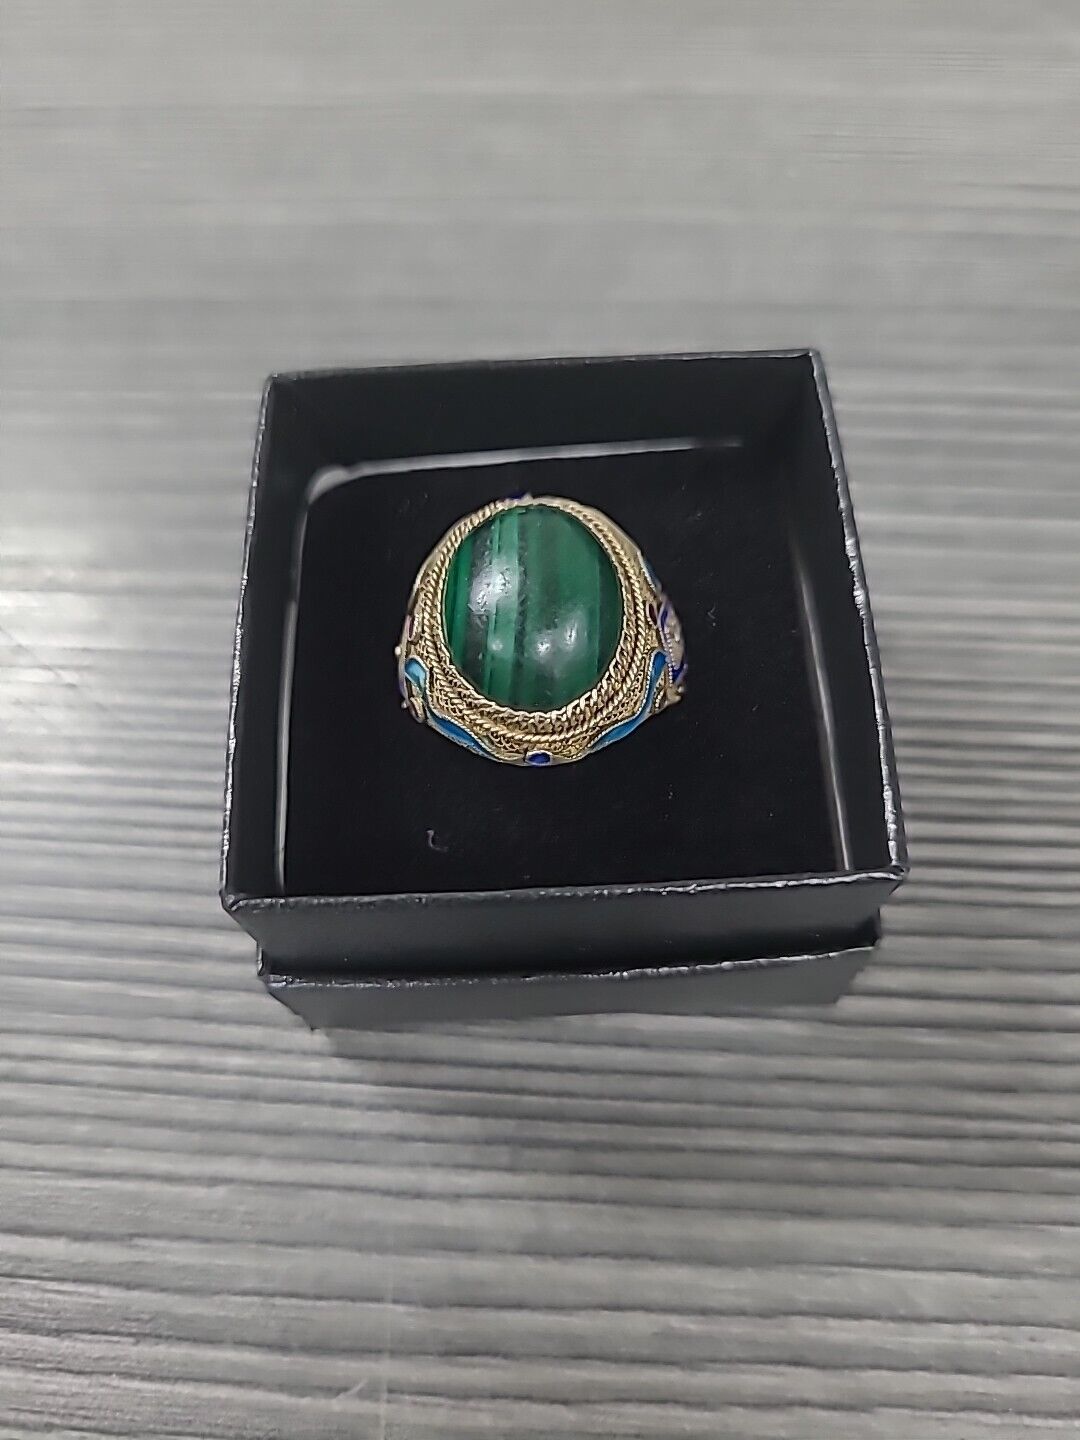 Vintage CHINESE STERLING SILVER Vermeil CARVED MALACHITE ENAMEL RING SIZE 8.5